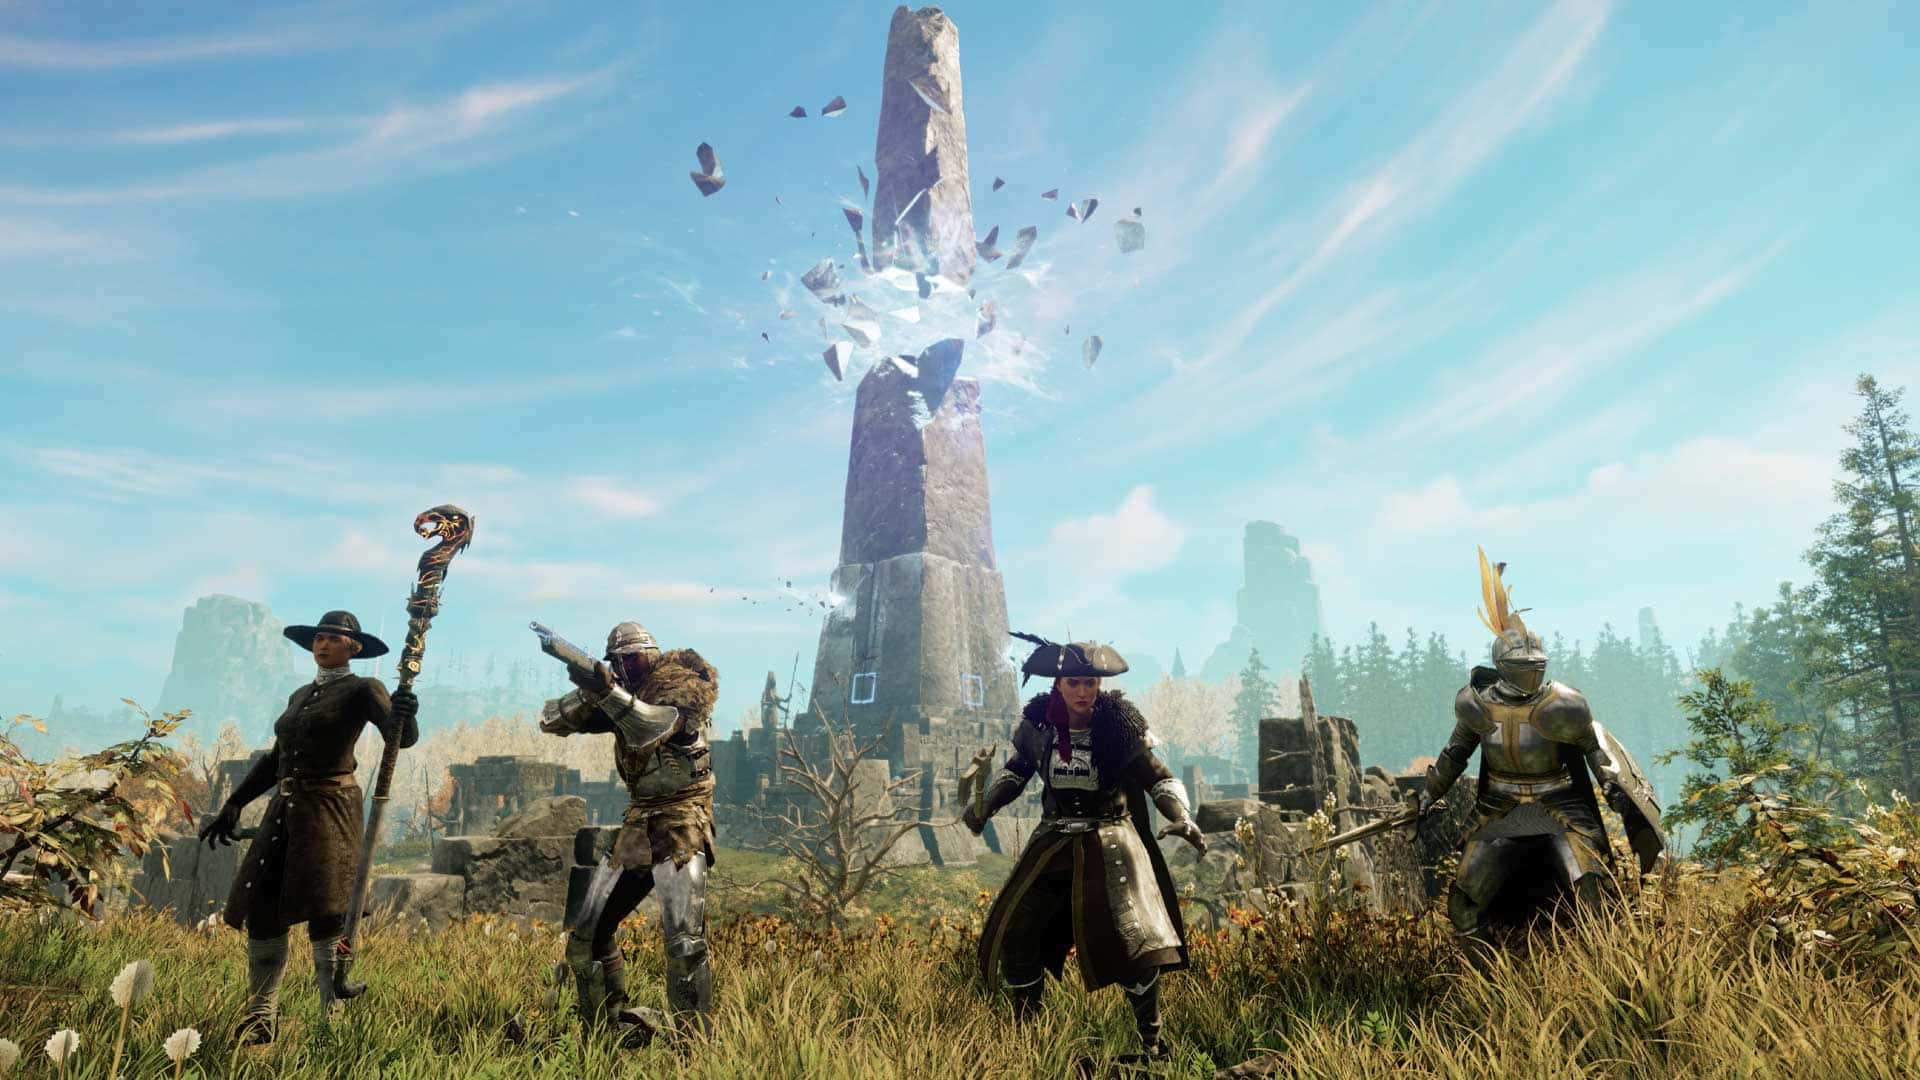 The Characters Are Standing In A Field With A Tower Wallpaper